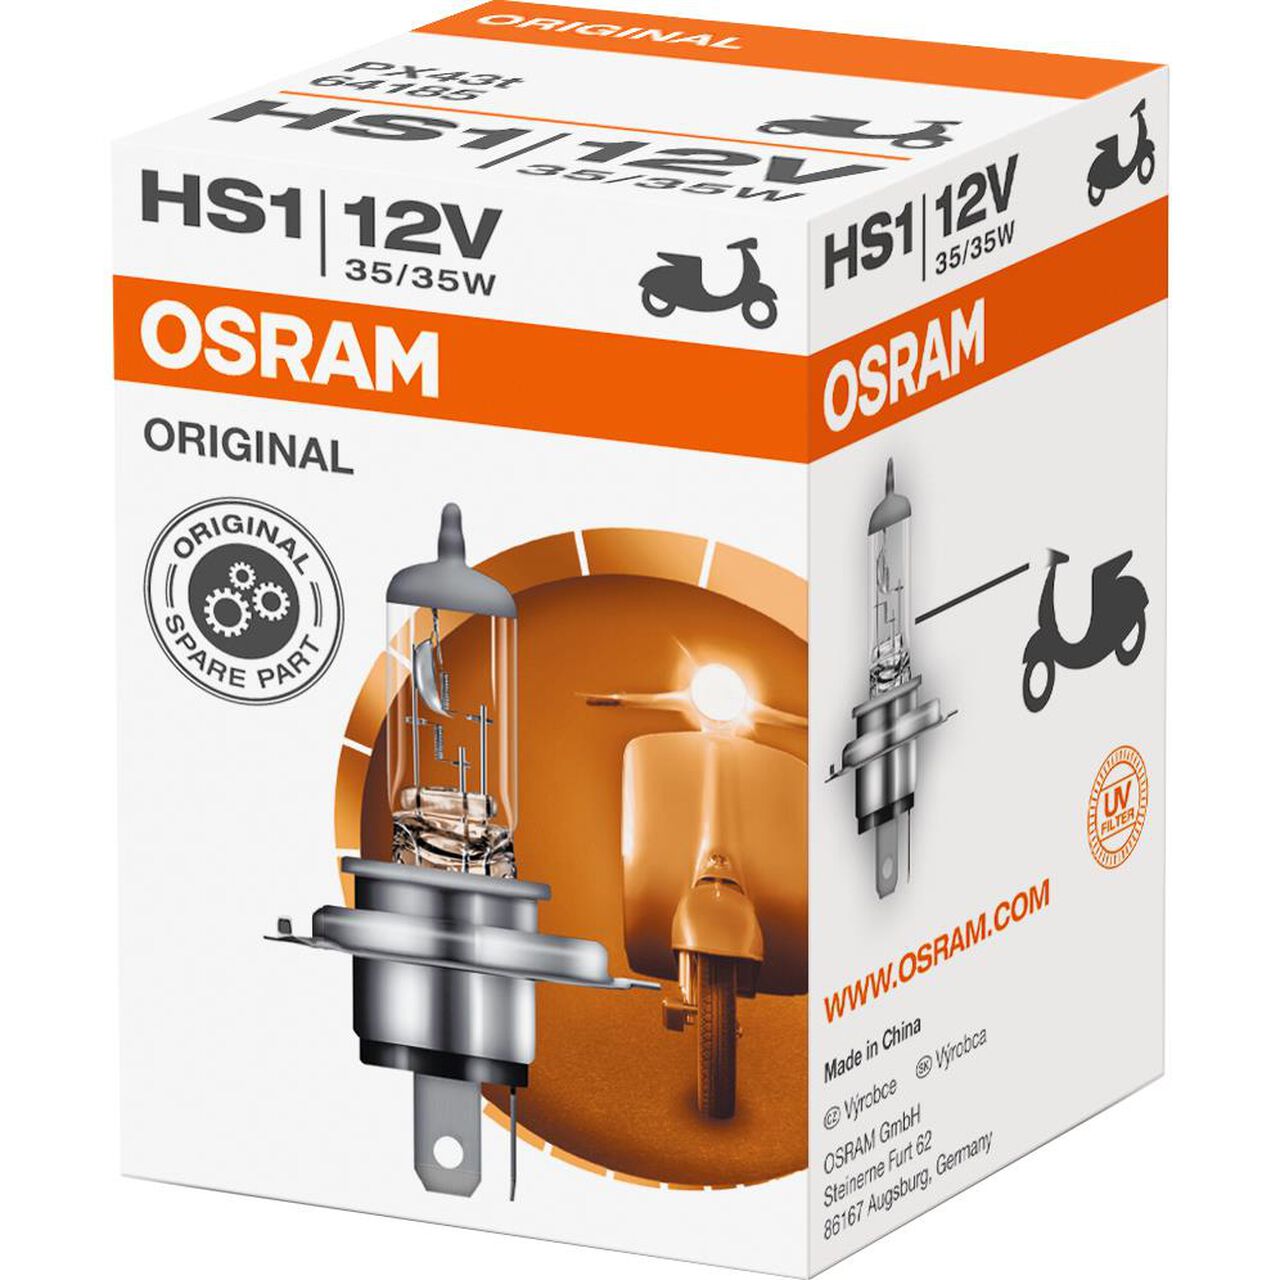 MotoFusion BD - Osram Night Racer Plus HS1 (12V 35/35W) Up to 90 % more  light on the road (compared to standard halogen lamps) More time to react  Up to 35 m